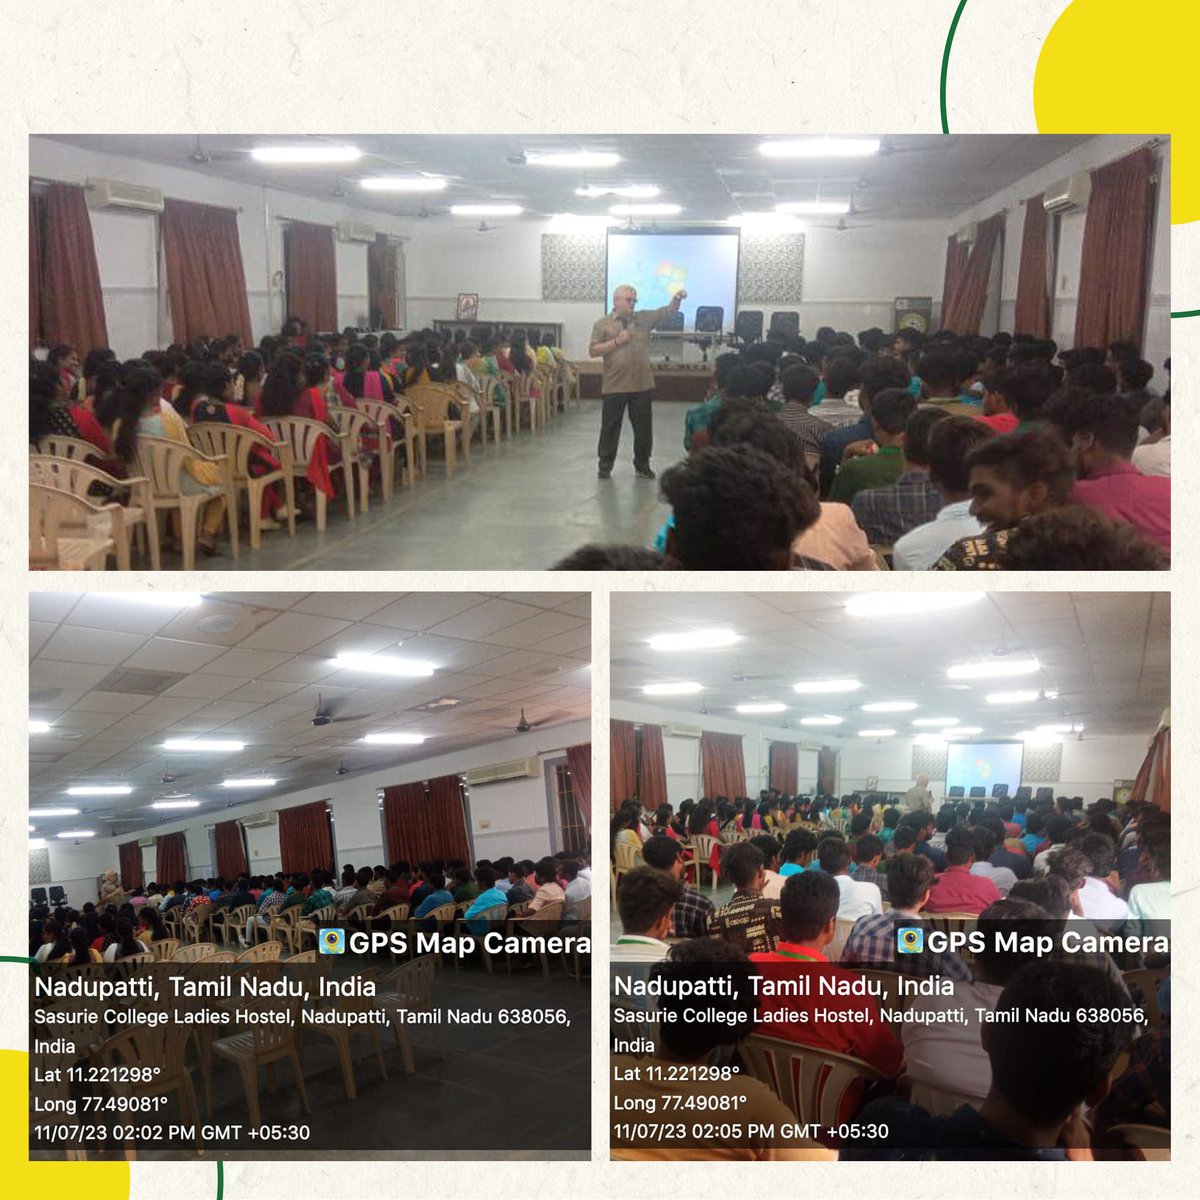 The Student Development Programme at Sasurie College of Arts & Science was a grand success. The Chief Guest Dr. G. Uma Shanker, Development Consultant, Tirupur, conducted an interactive workshop with the students.
#studentlife #program #developmentprogramme #sasurieinstitutios